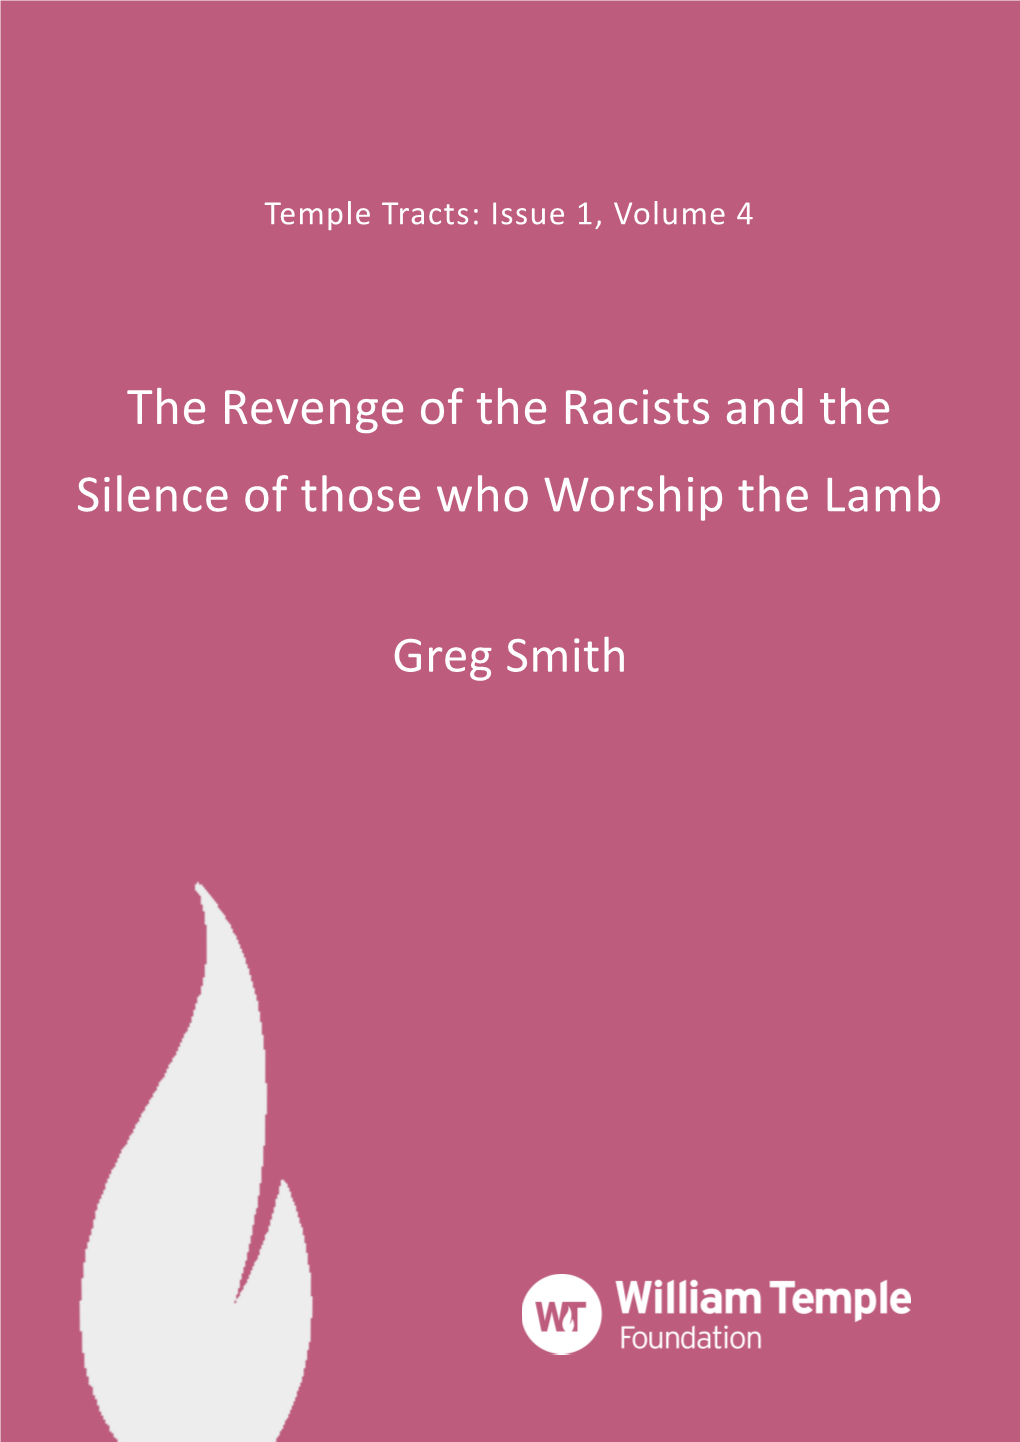 The Revenge of the Racists and the Silence of Those Who Worship the Lamb